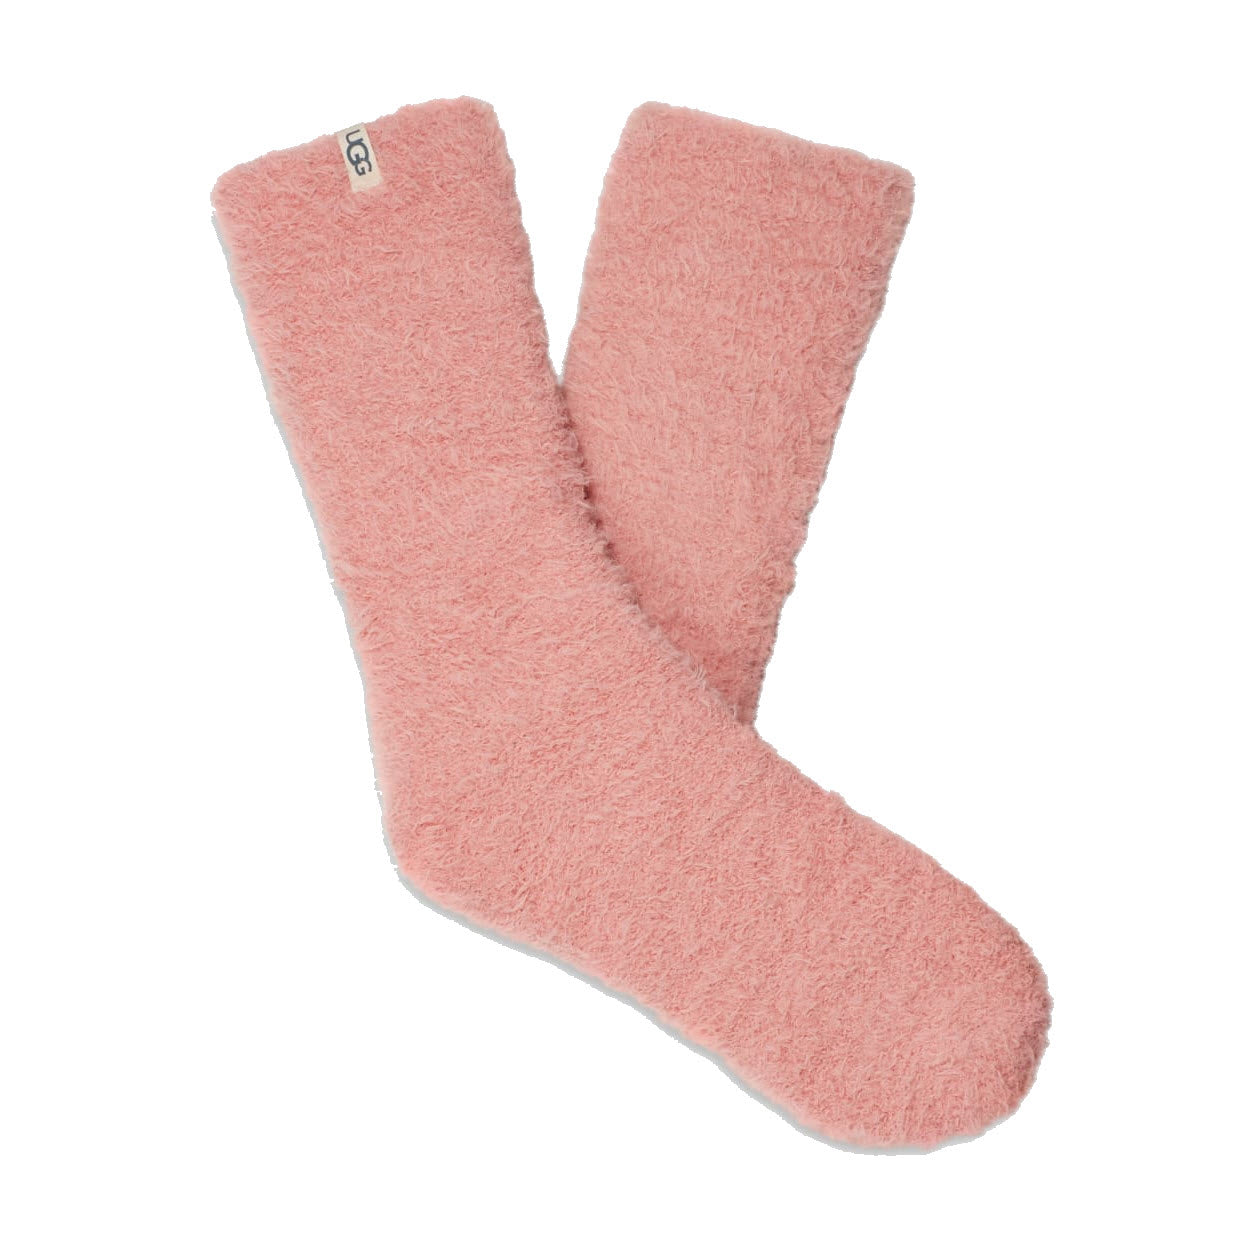 A pair of UGG Teddi Cozy crew socks in clay pink, soft knit, isolated on a white background.